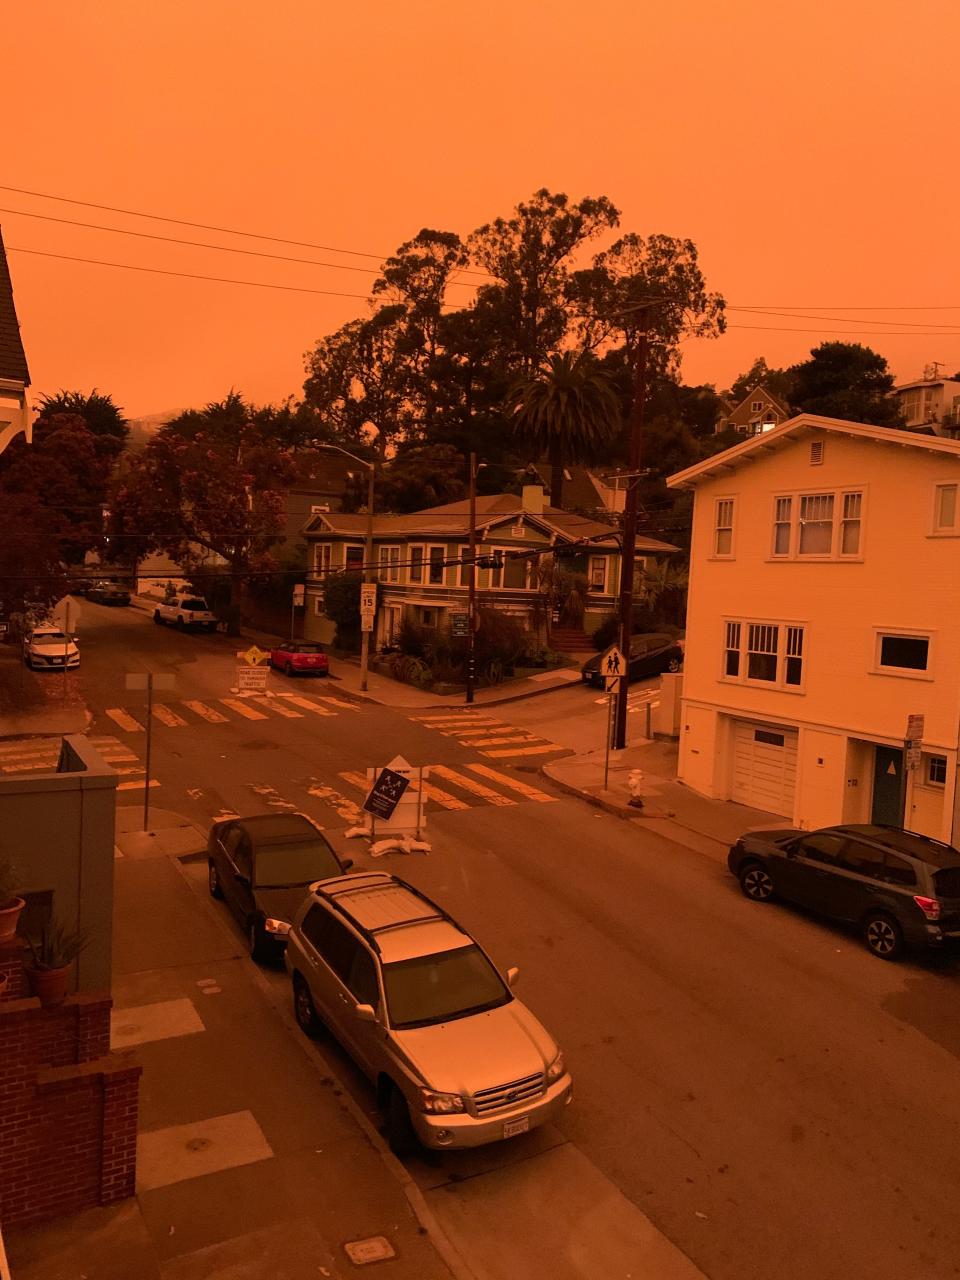 San Francisco's Glen Park neighborhood at 9:55 am Pacific Daylight Time on Wednesday, September 9, 2020. Smoke from numerous wildfires over a layer of marine fog turned the sky an eerie orange color. Cars were using headlines and some street lights were still on.